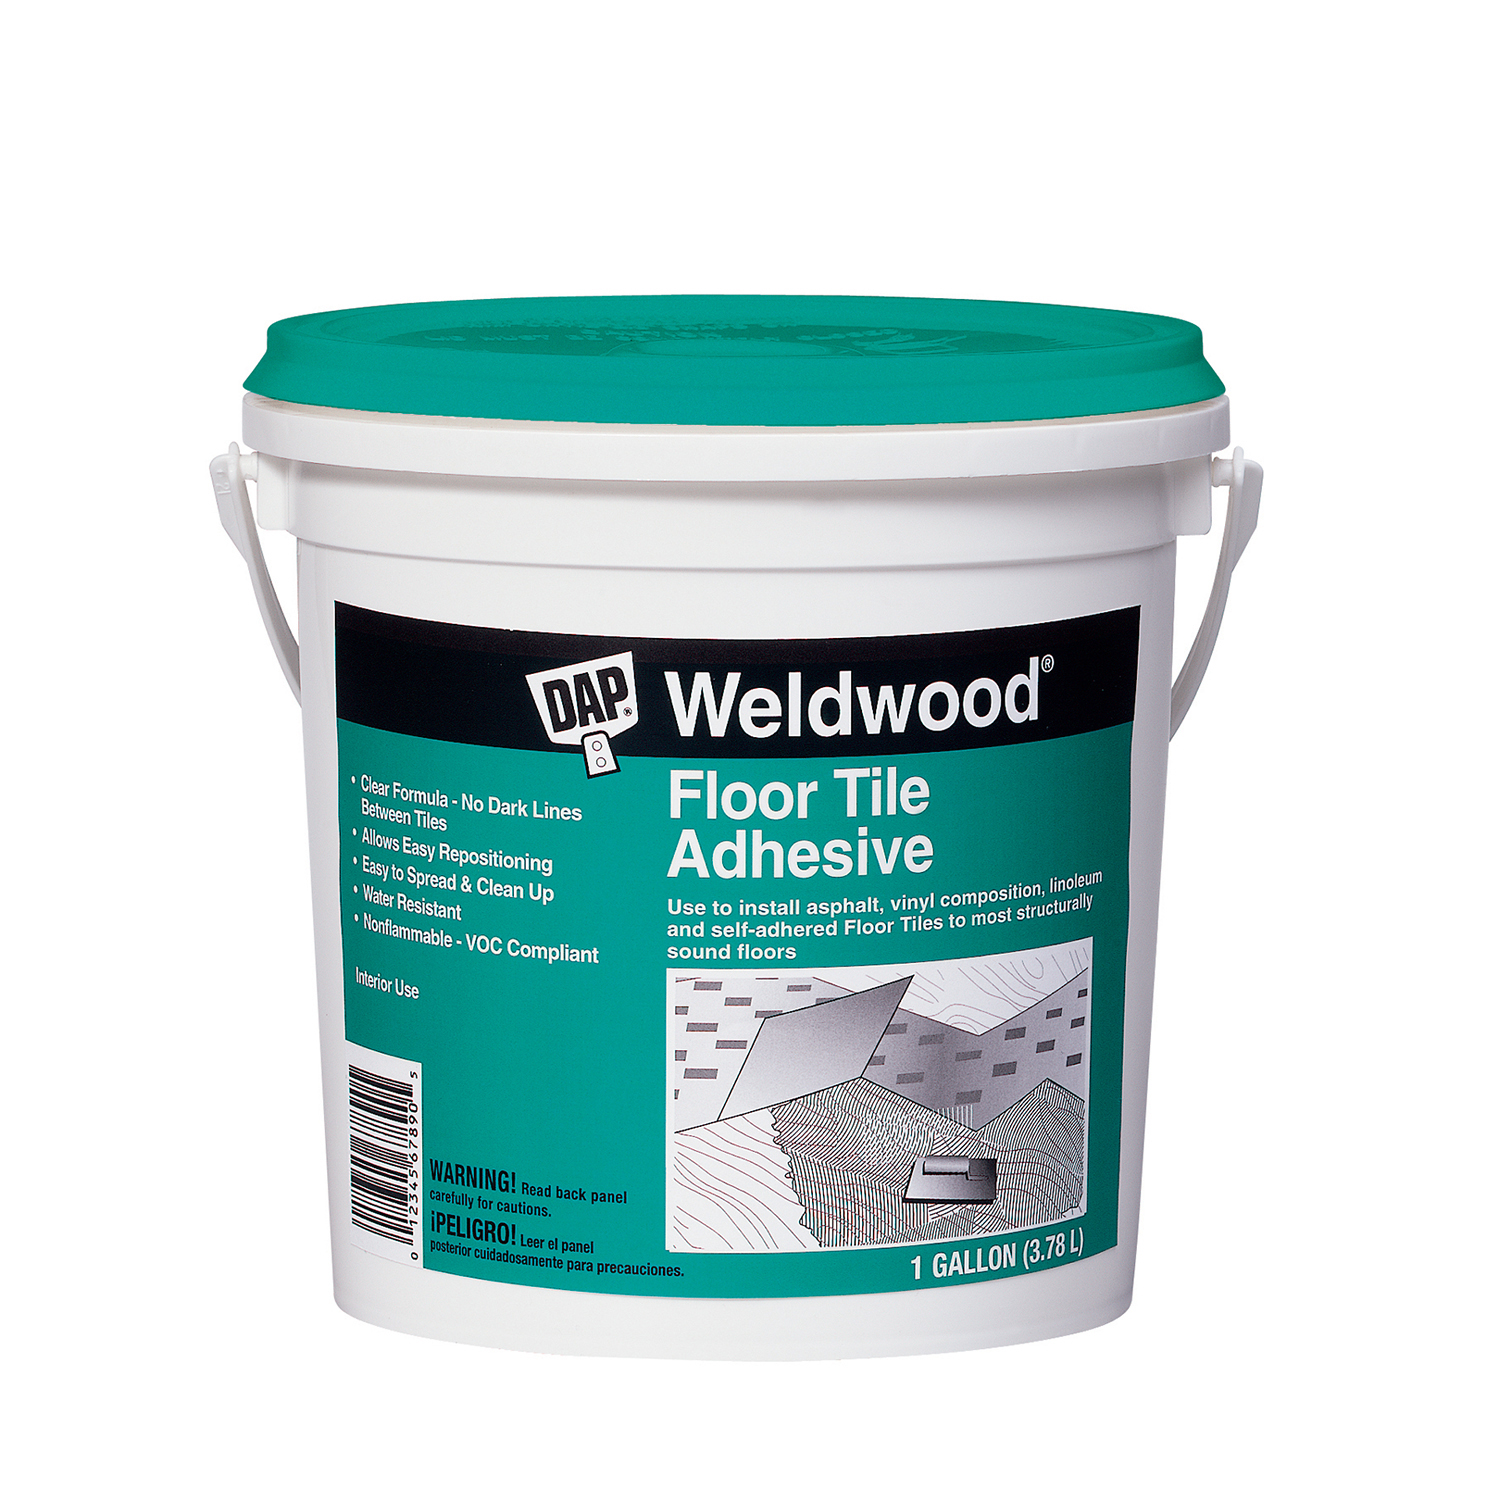 Fastest What Adhesive To Use On Floor Tiles, What Adhesive To Use For Vinyl Flooring